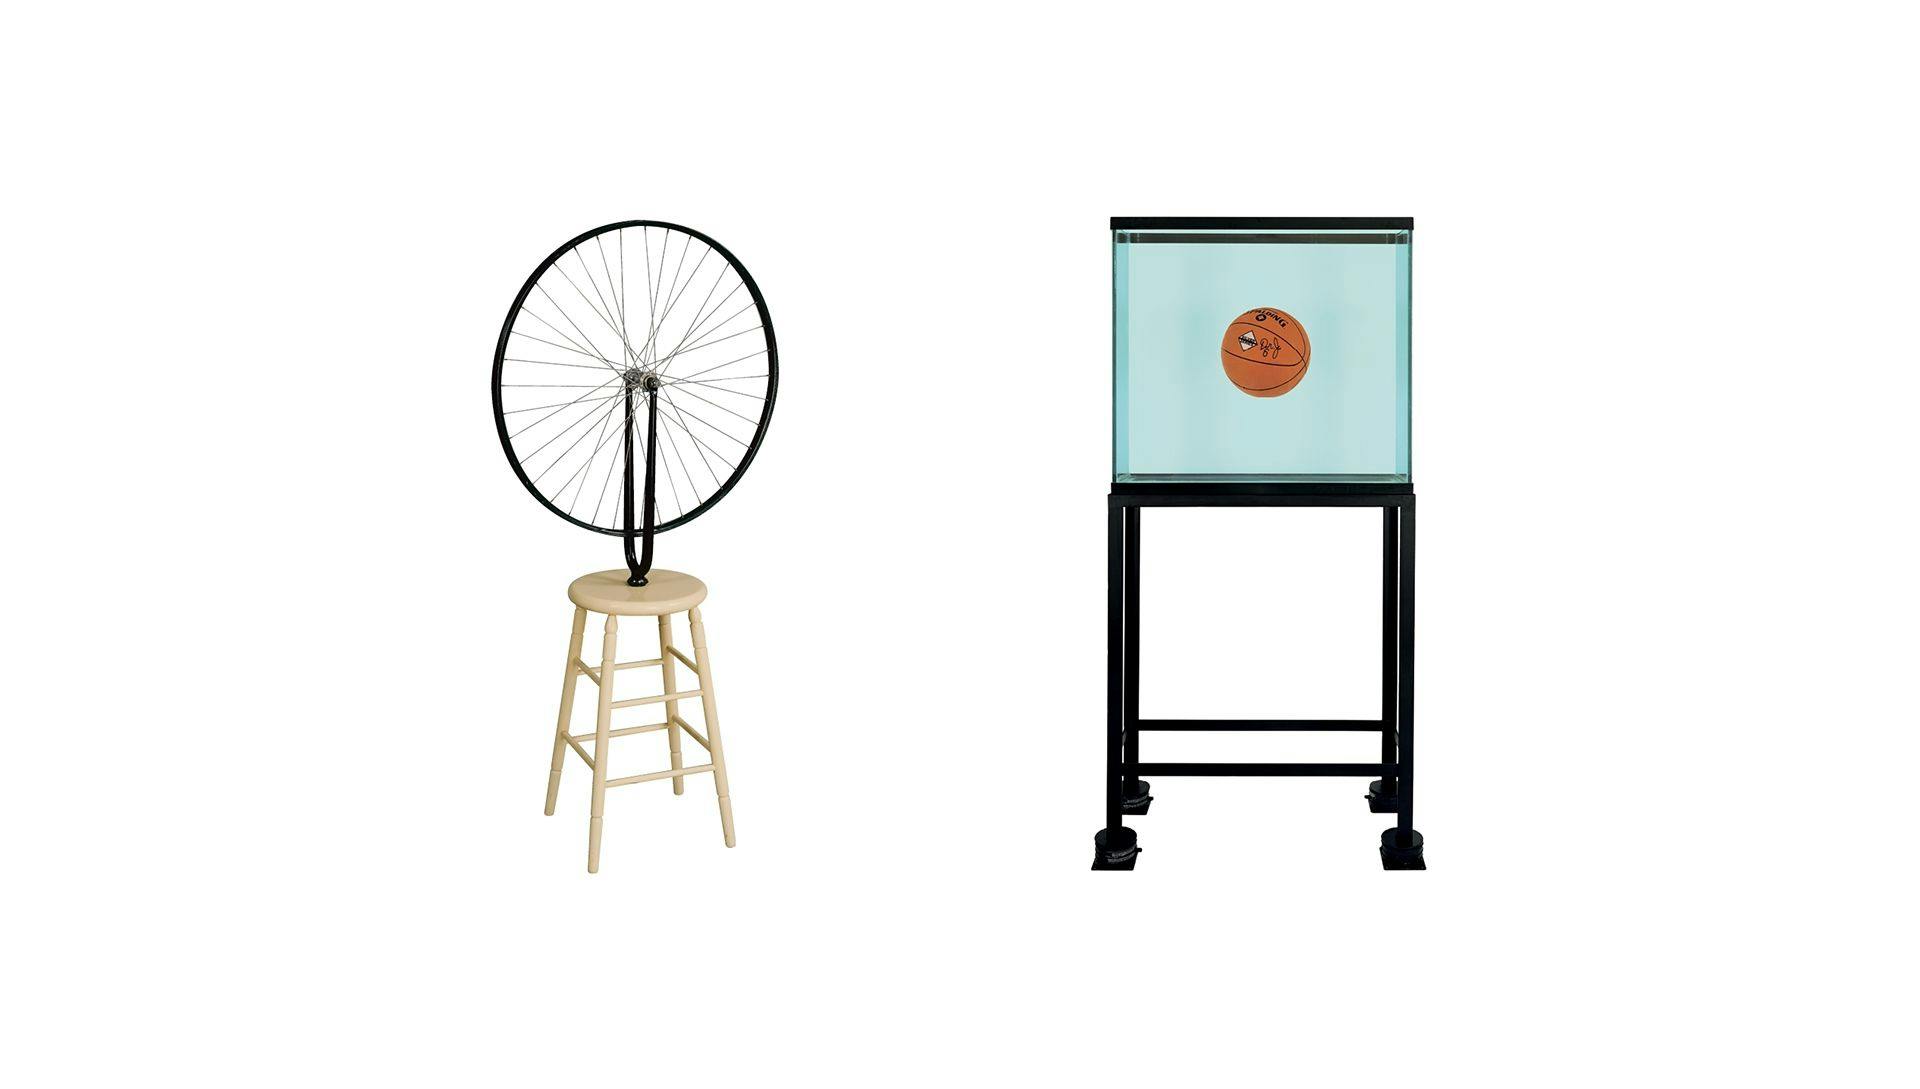 "Left: a sculpture by Marcel Duchamp, titled Roue de Bicyclette, dated 1913 Right: a sculpture by Jeff Koons, titled One Ball Total Equilibrium Tank (Spalding Dr. J Silver Series), dated 1985.